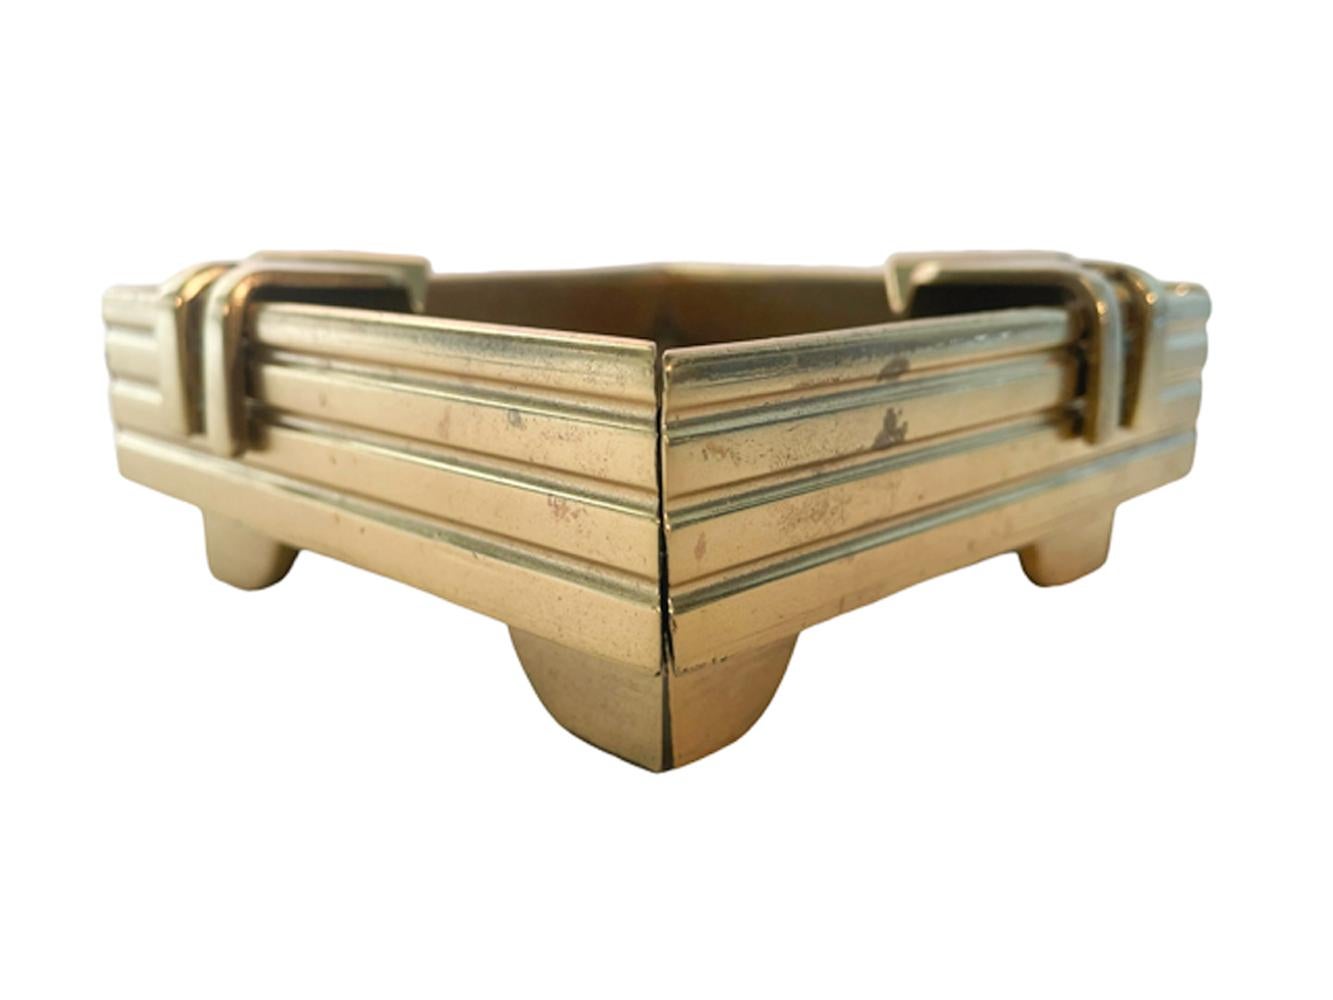 Square bronze ashtray of architectural form with mitered corners and nickel rivets. The square bowl with ribbed sides raised on inset feet, two cigar rests clip onto opposing corners. The modernist style of this piece suggests Bauhaus architecture